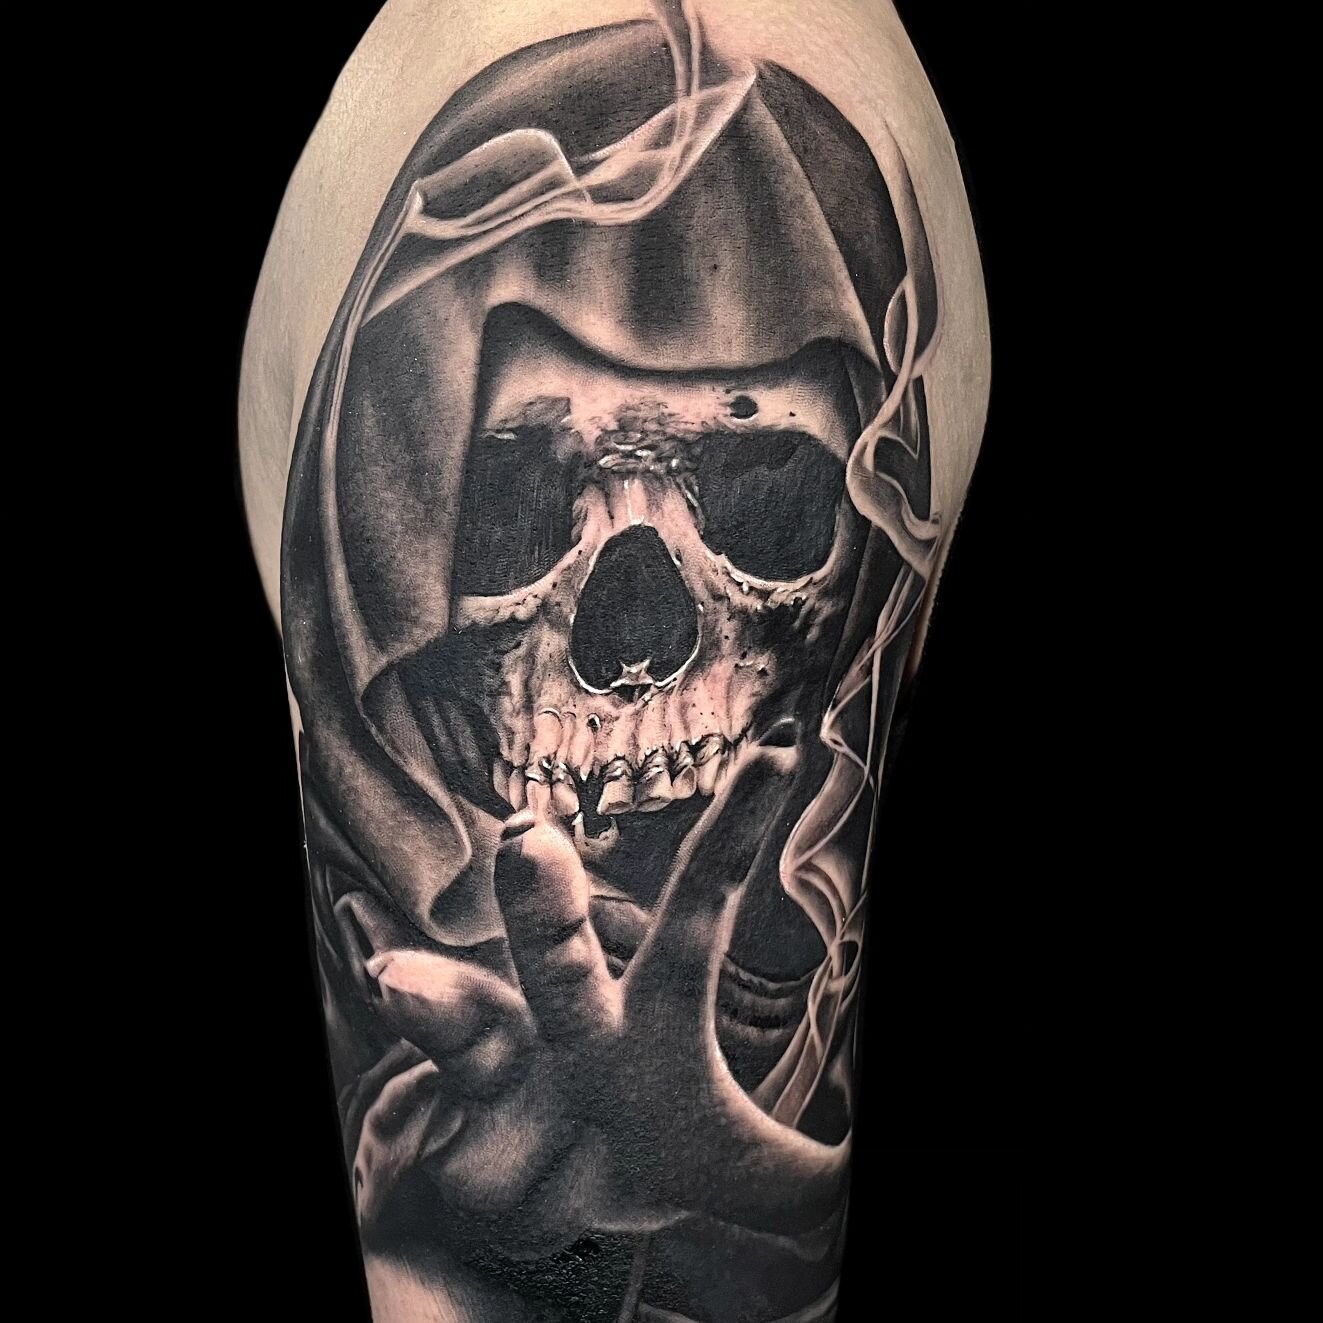 Black and Gray realism tattoo done by Tadao @tstattoodesign 
He loves to make such tattoos. Let us know via our website if you are interested in his work.
Or you could send DM him👉@tstattoodesign 😉
#blackandgraytattoos #blackandgrayrealismtattoos #